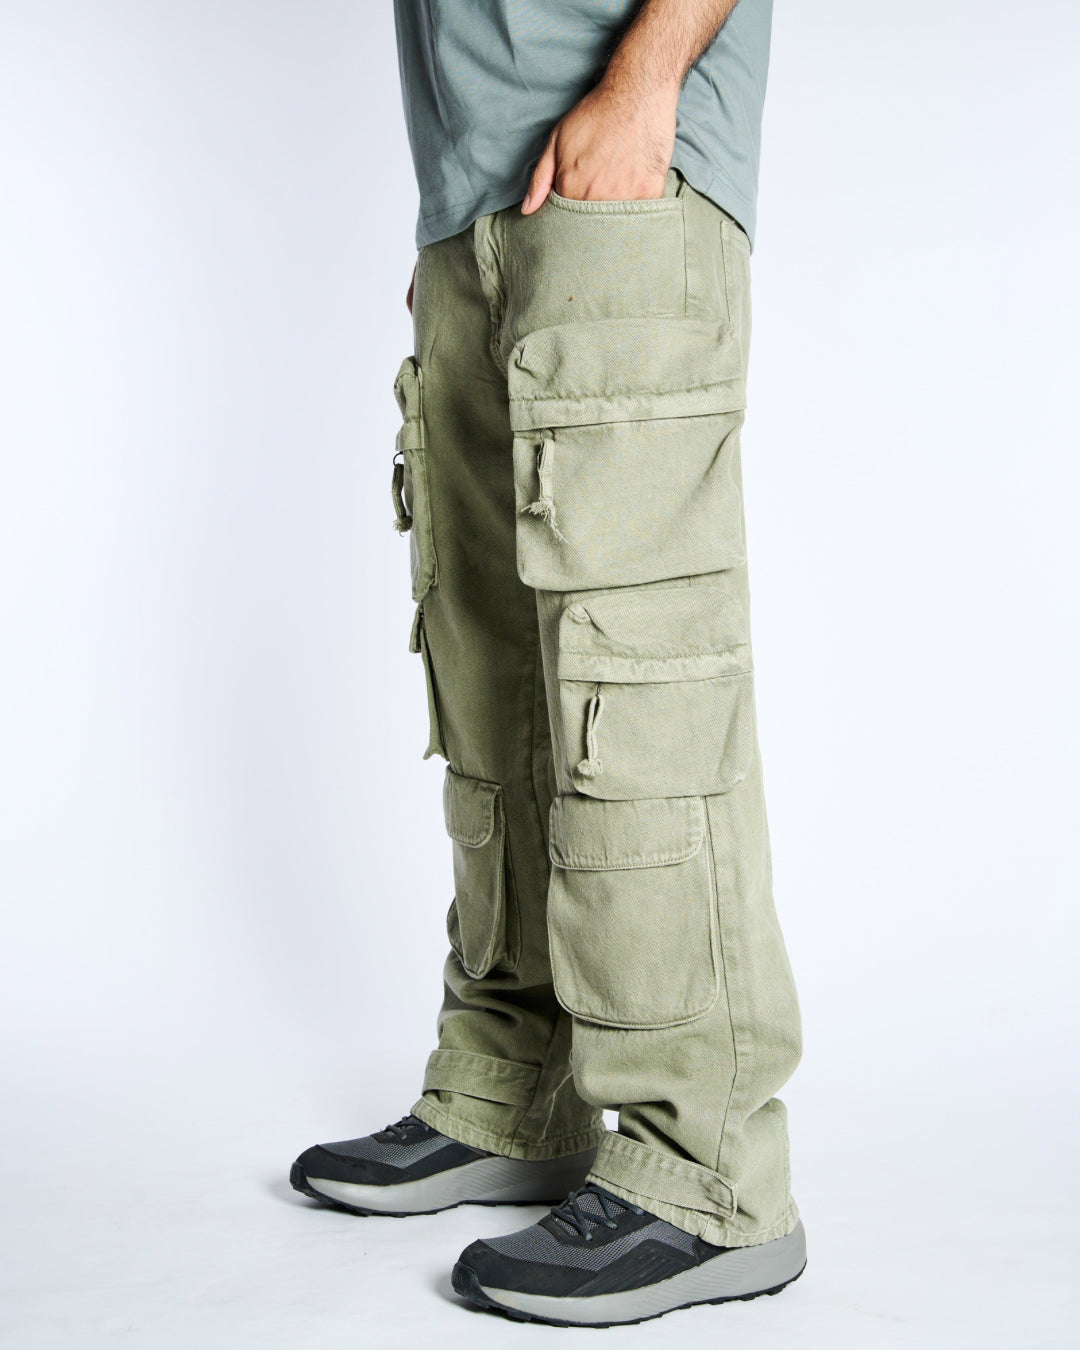 Green Utility Jeans With Pockets